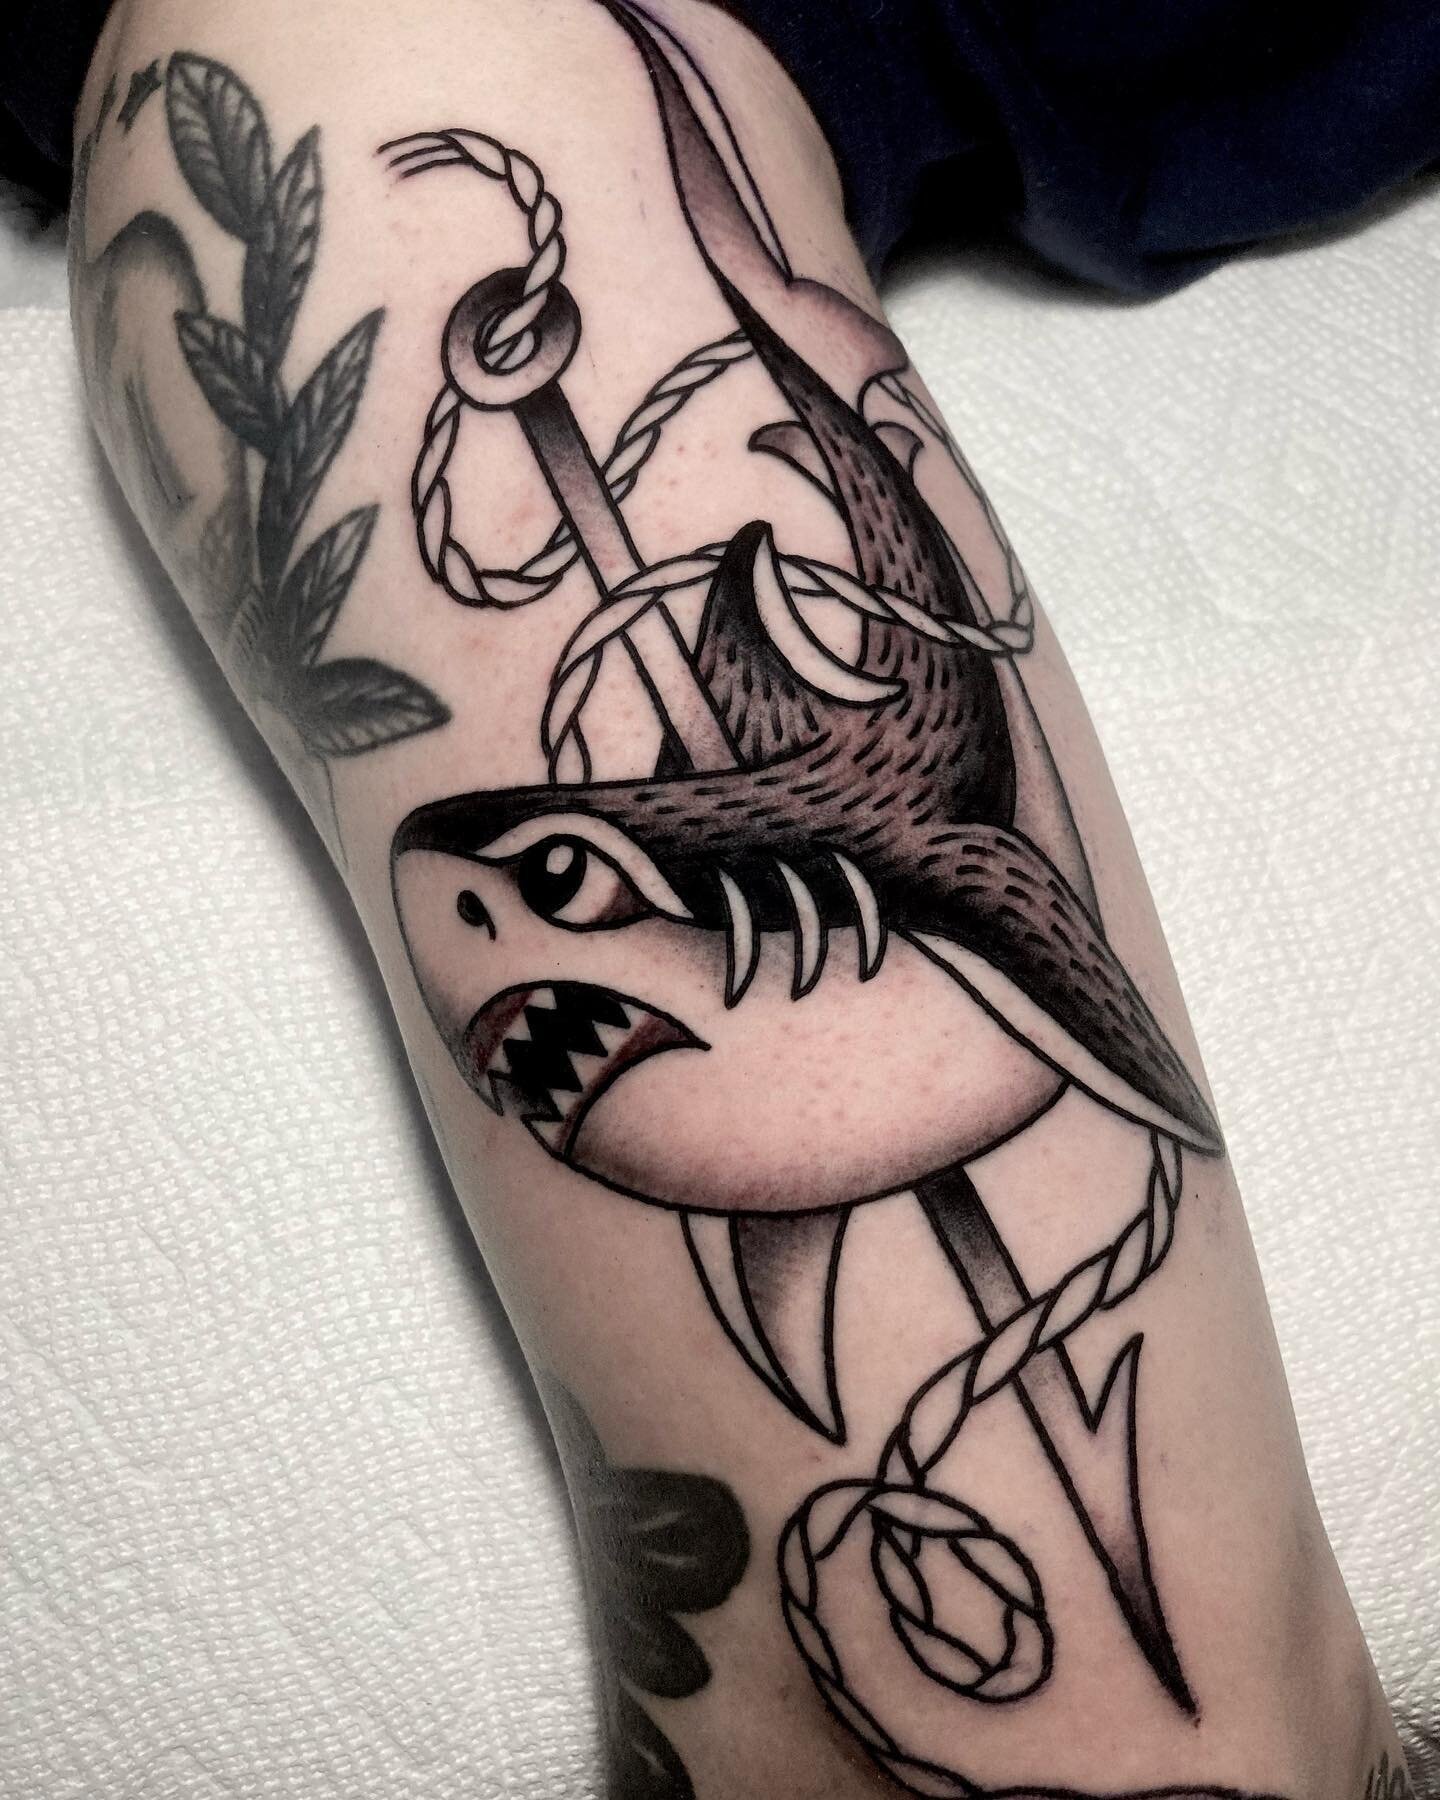 A couple of sharkie-poos for the boys @hotlinetattoo 

**************************************
To get on my waitlist, click the link in my Bio. If you're looking for something small, or a walk-in tattoo, feel free to call the shop at
508-827-7911 to s